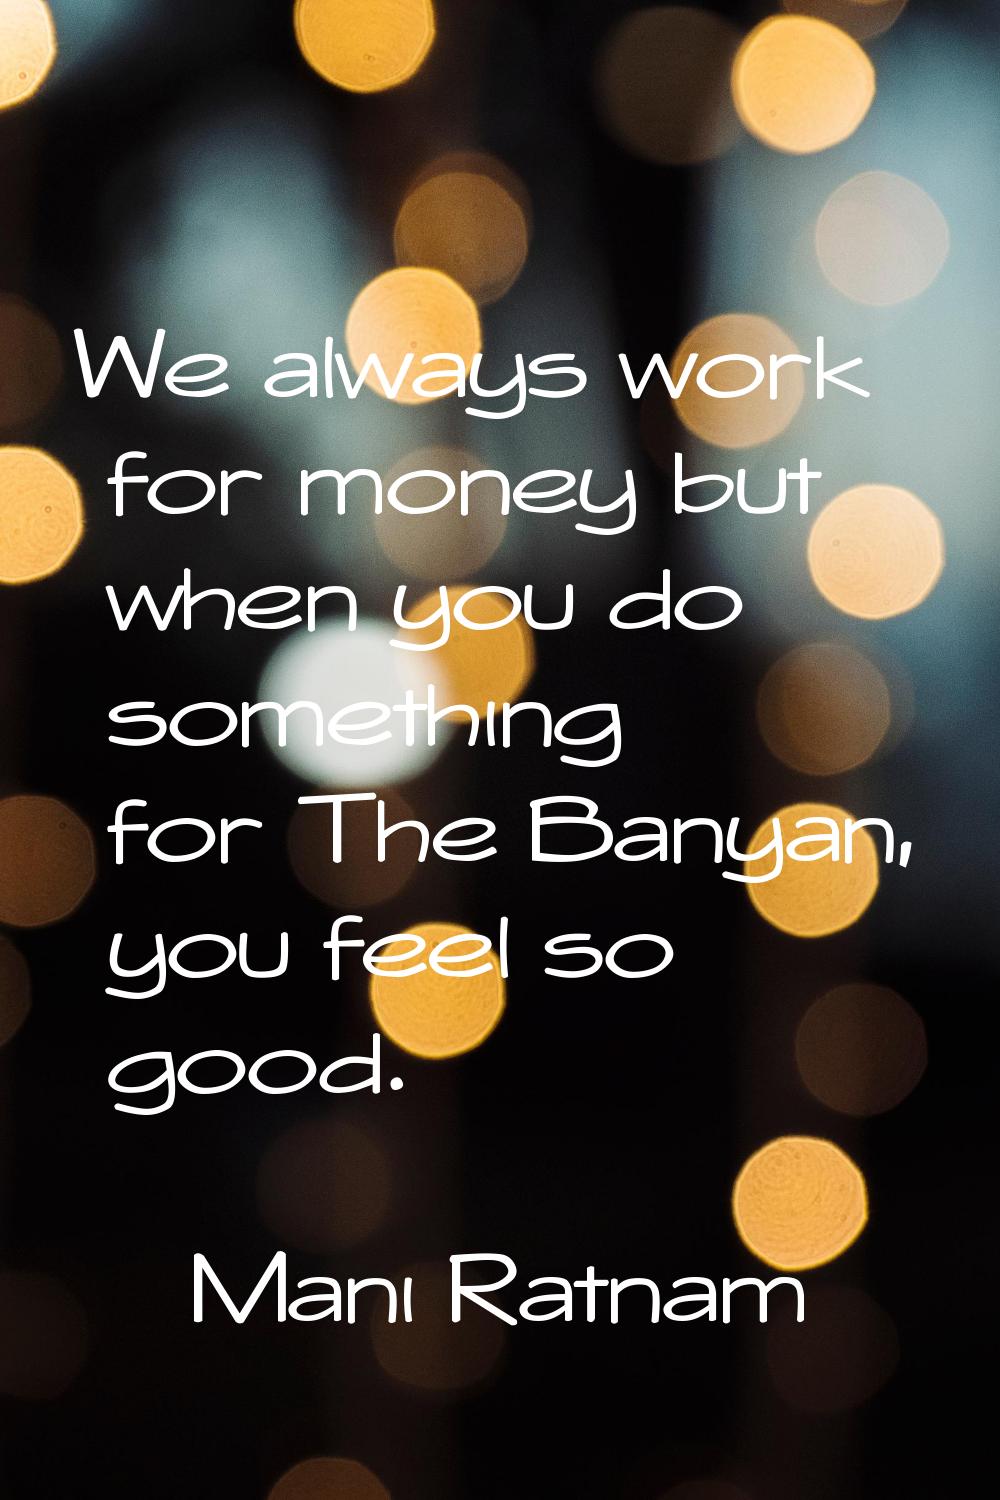 We always work for money but when you do something for The Banyan, you feel so good.